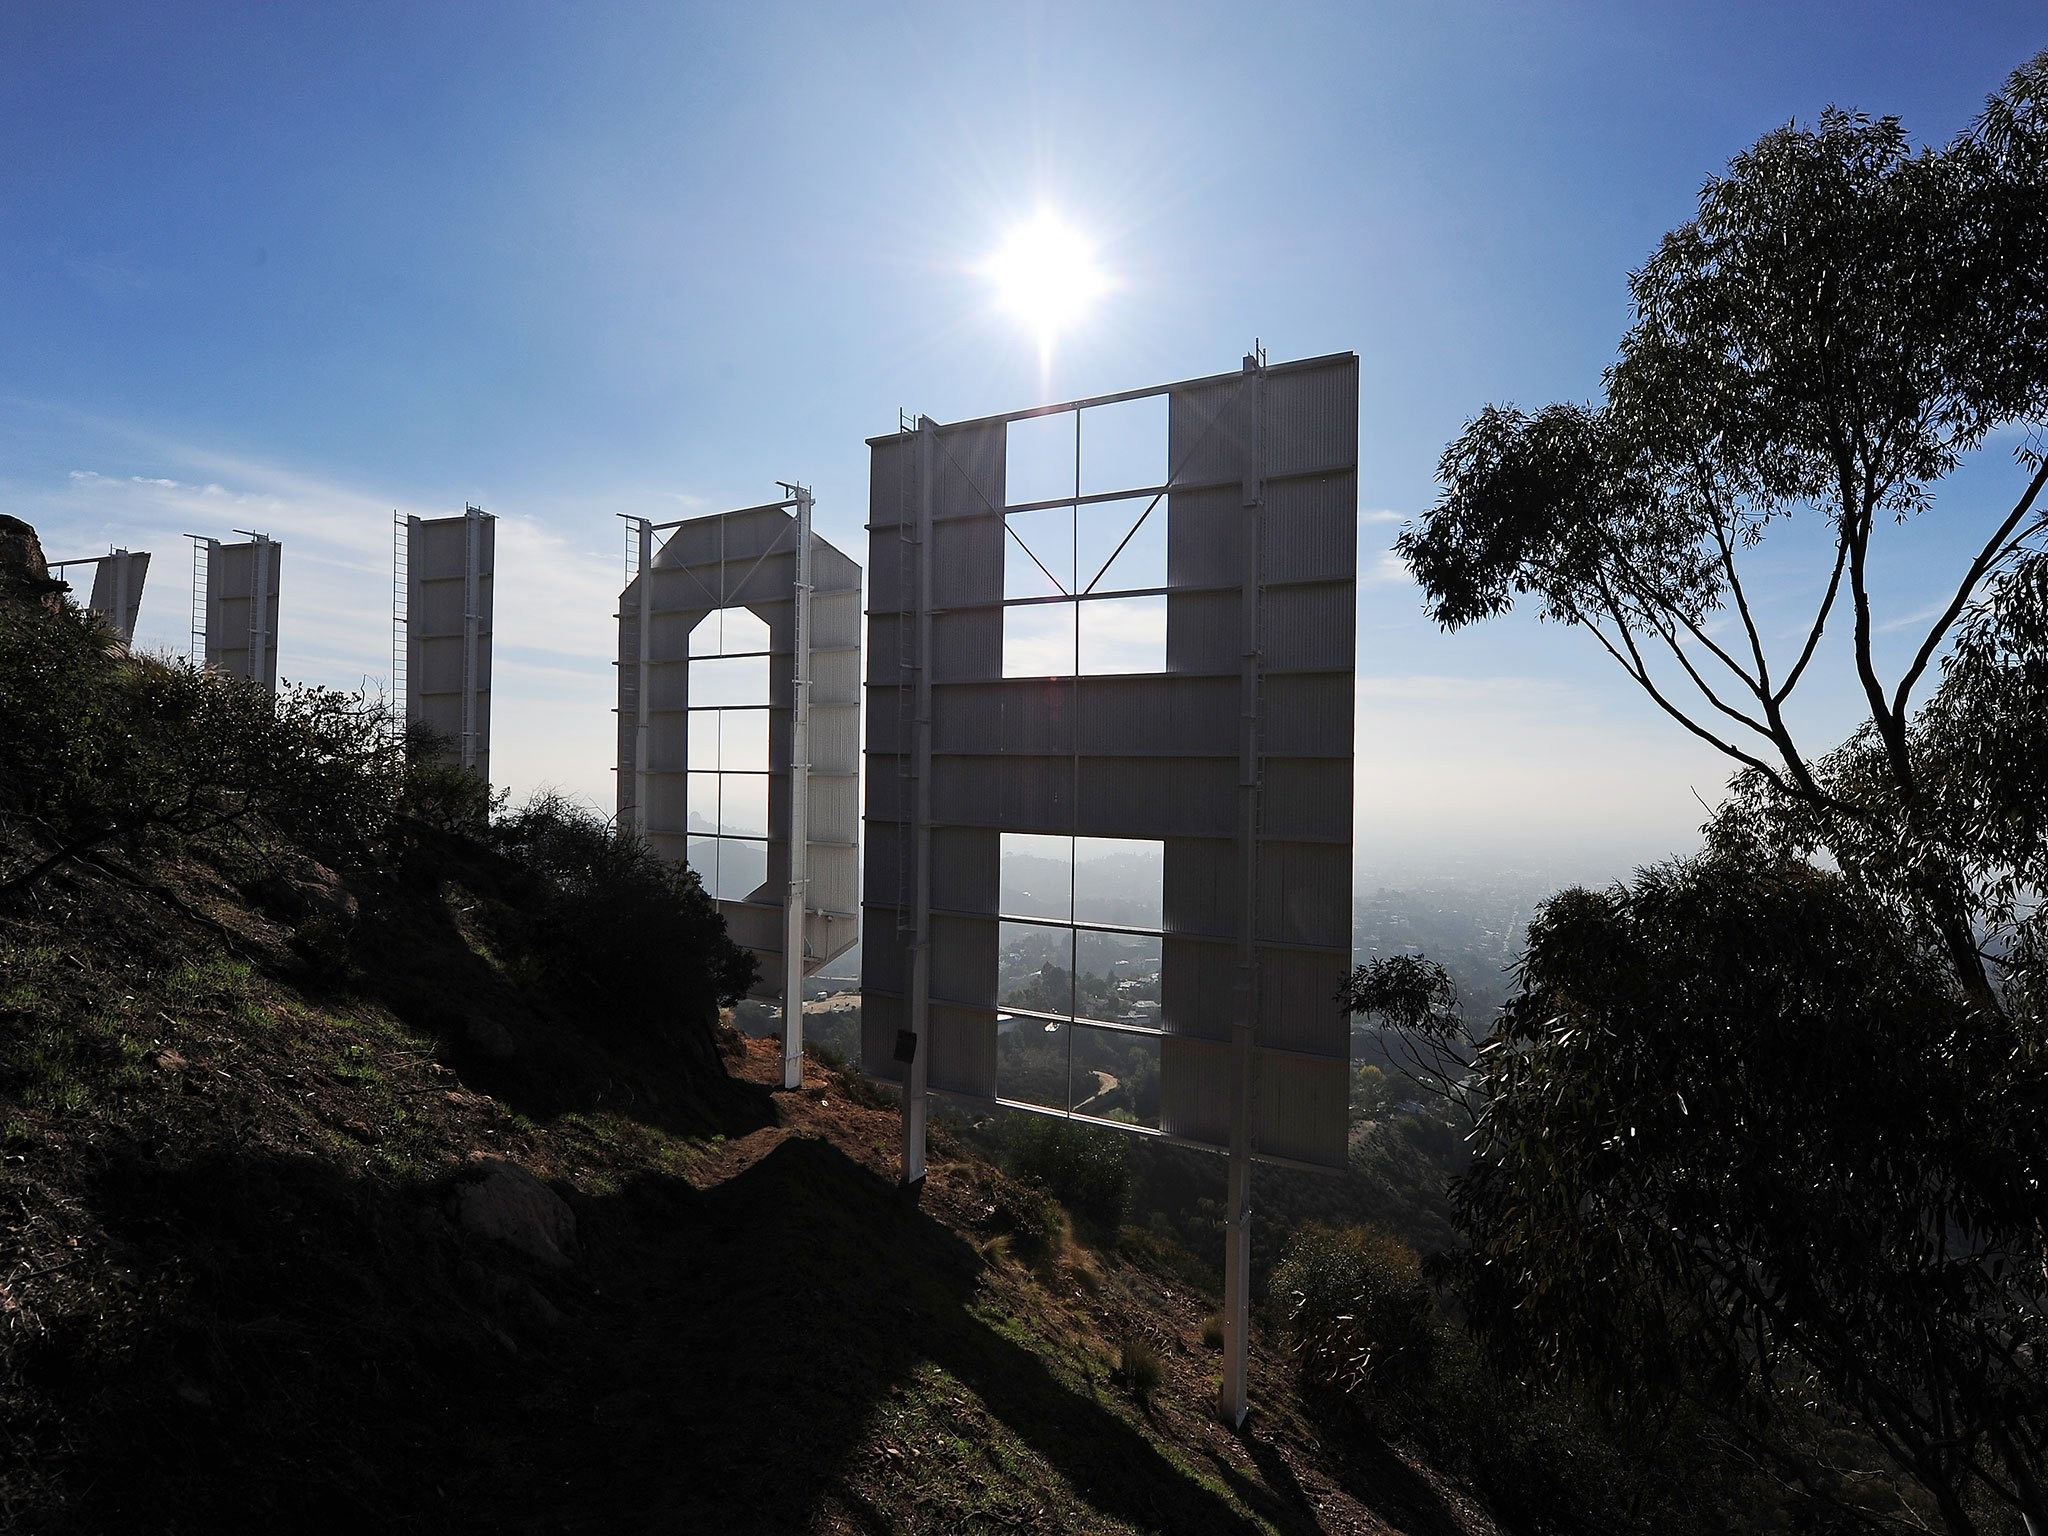 2048x1536 Trademark law stops people filming Hollywood Sign